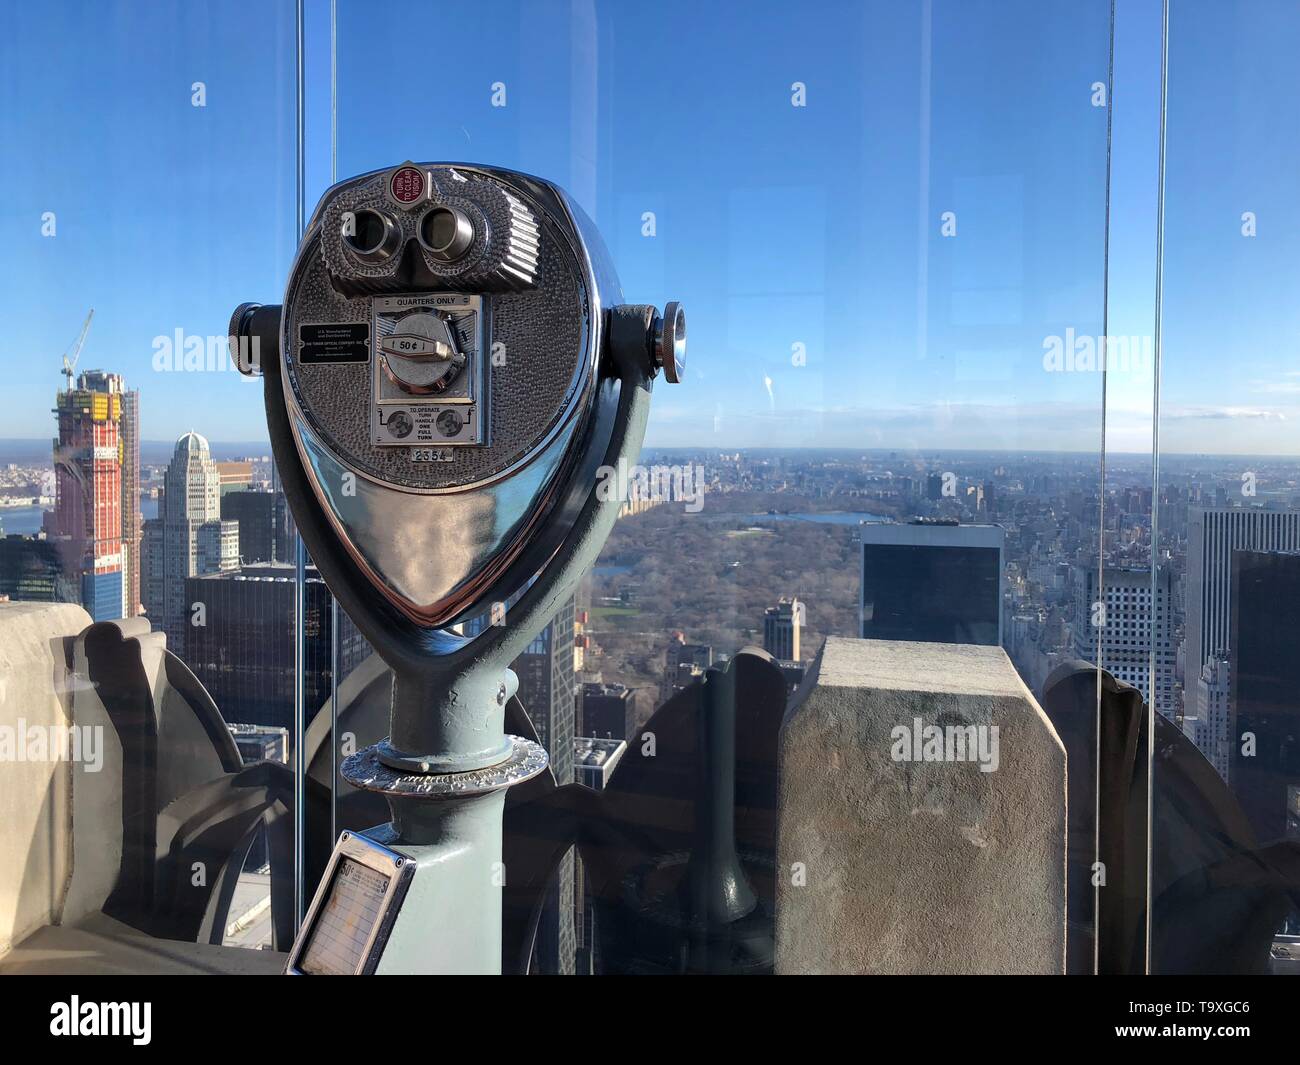 Coin Operated Binoculars on top of a building in New York City Stock Photo